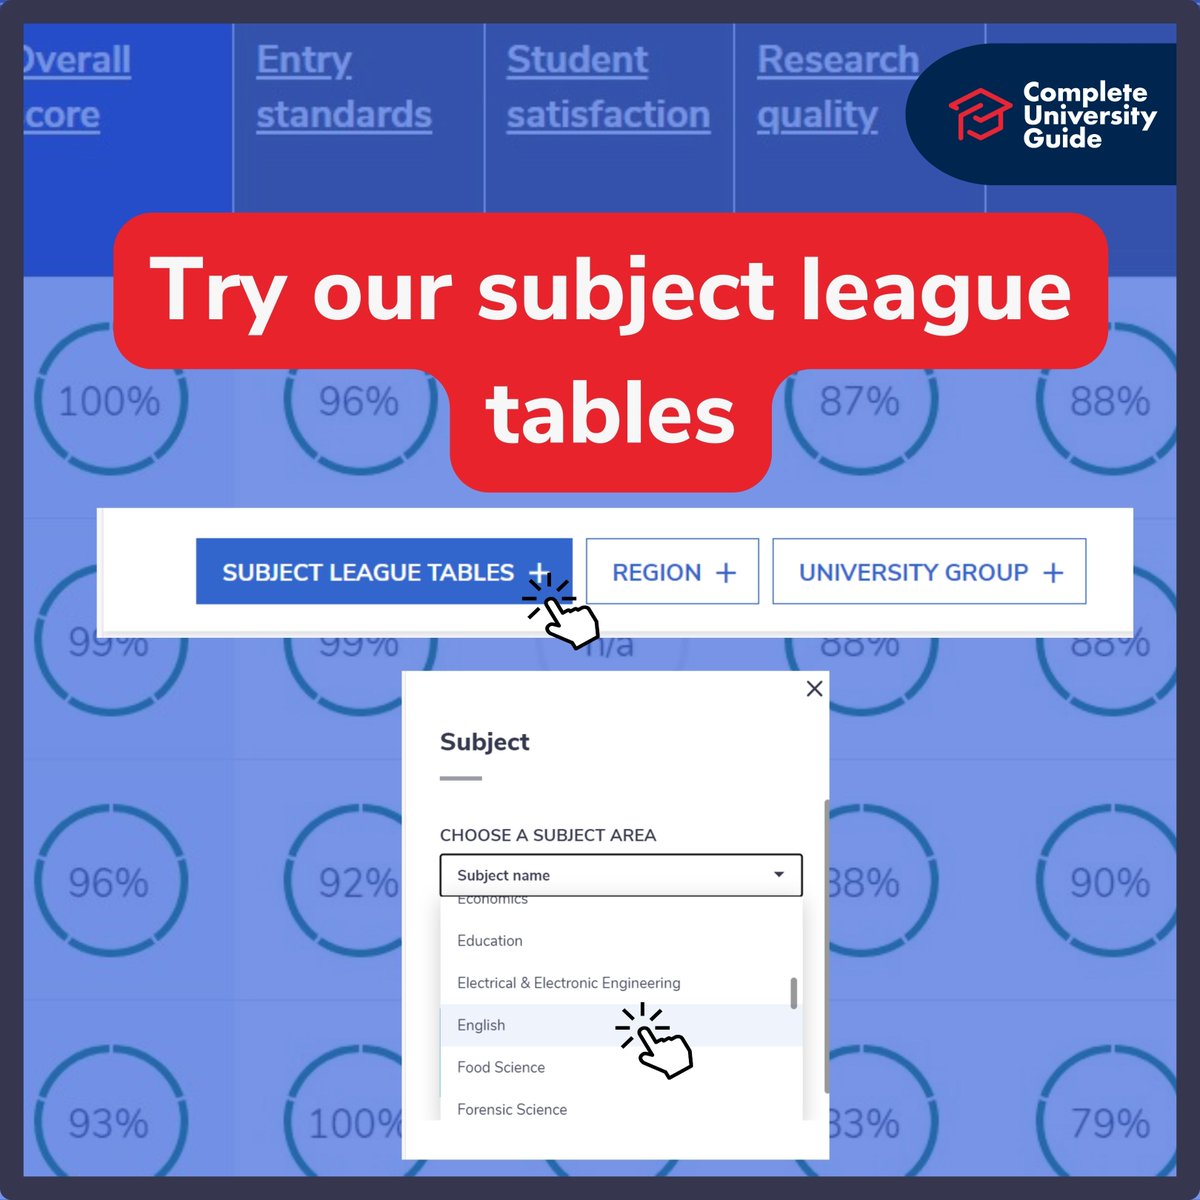 Our league tables rank the best universities in 74 subject areas. 
Try our subject league tables for yourself and discover who comes top for your dream university course!
Explore here 👉 bit.ly/3USQZvp

#leaguetables2025 #leaguetables #rankings #university #students